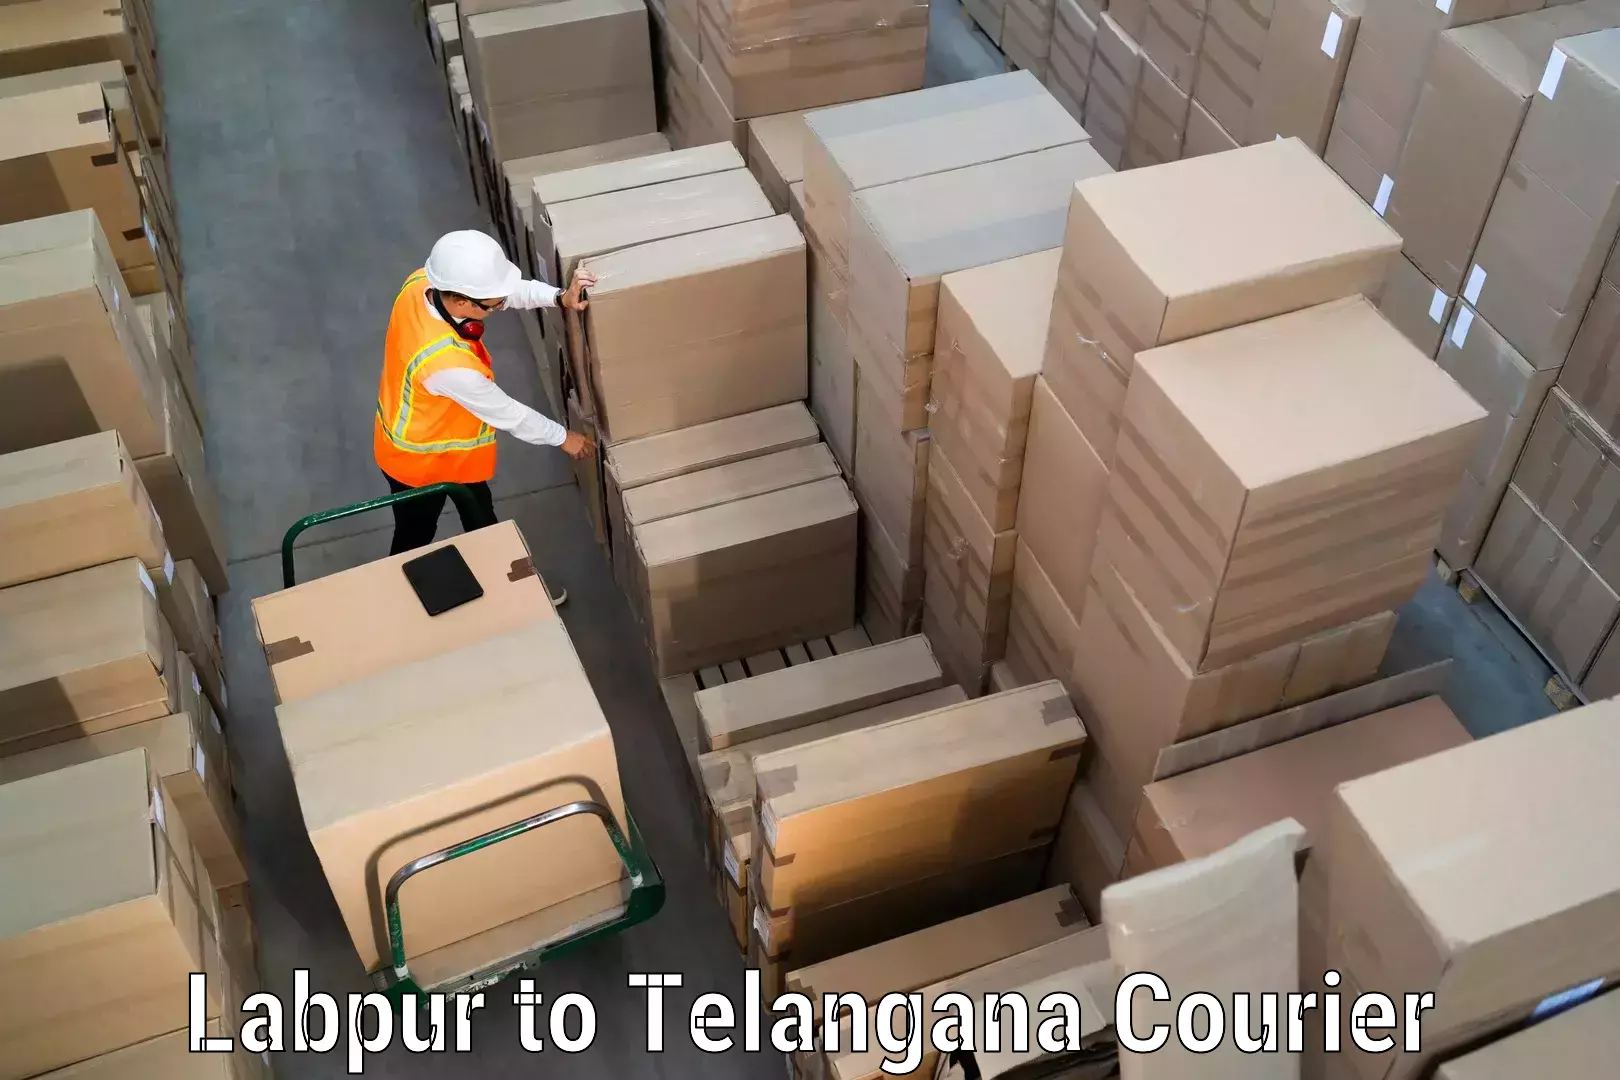 On-call courier service in Labpur to Narsapur Medak